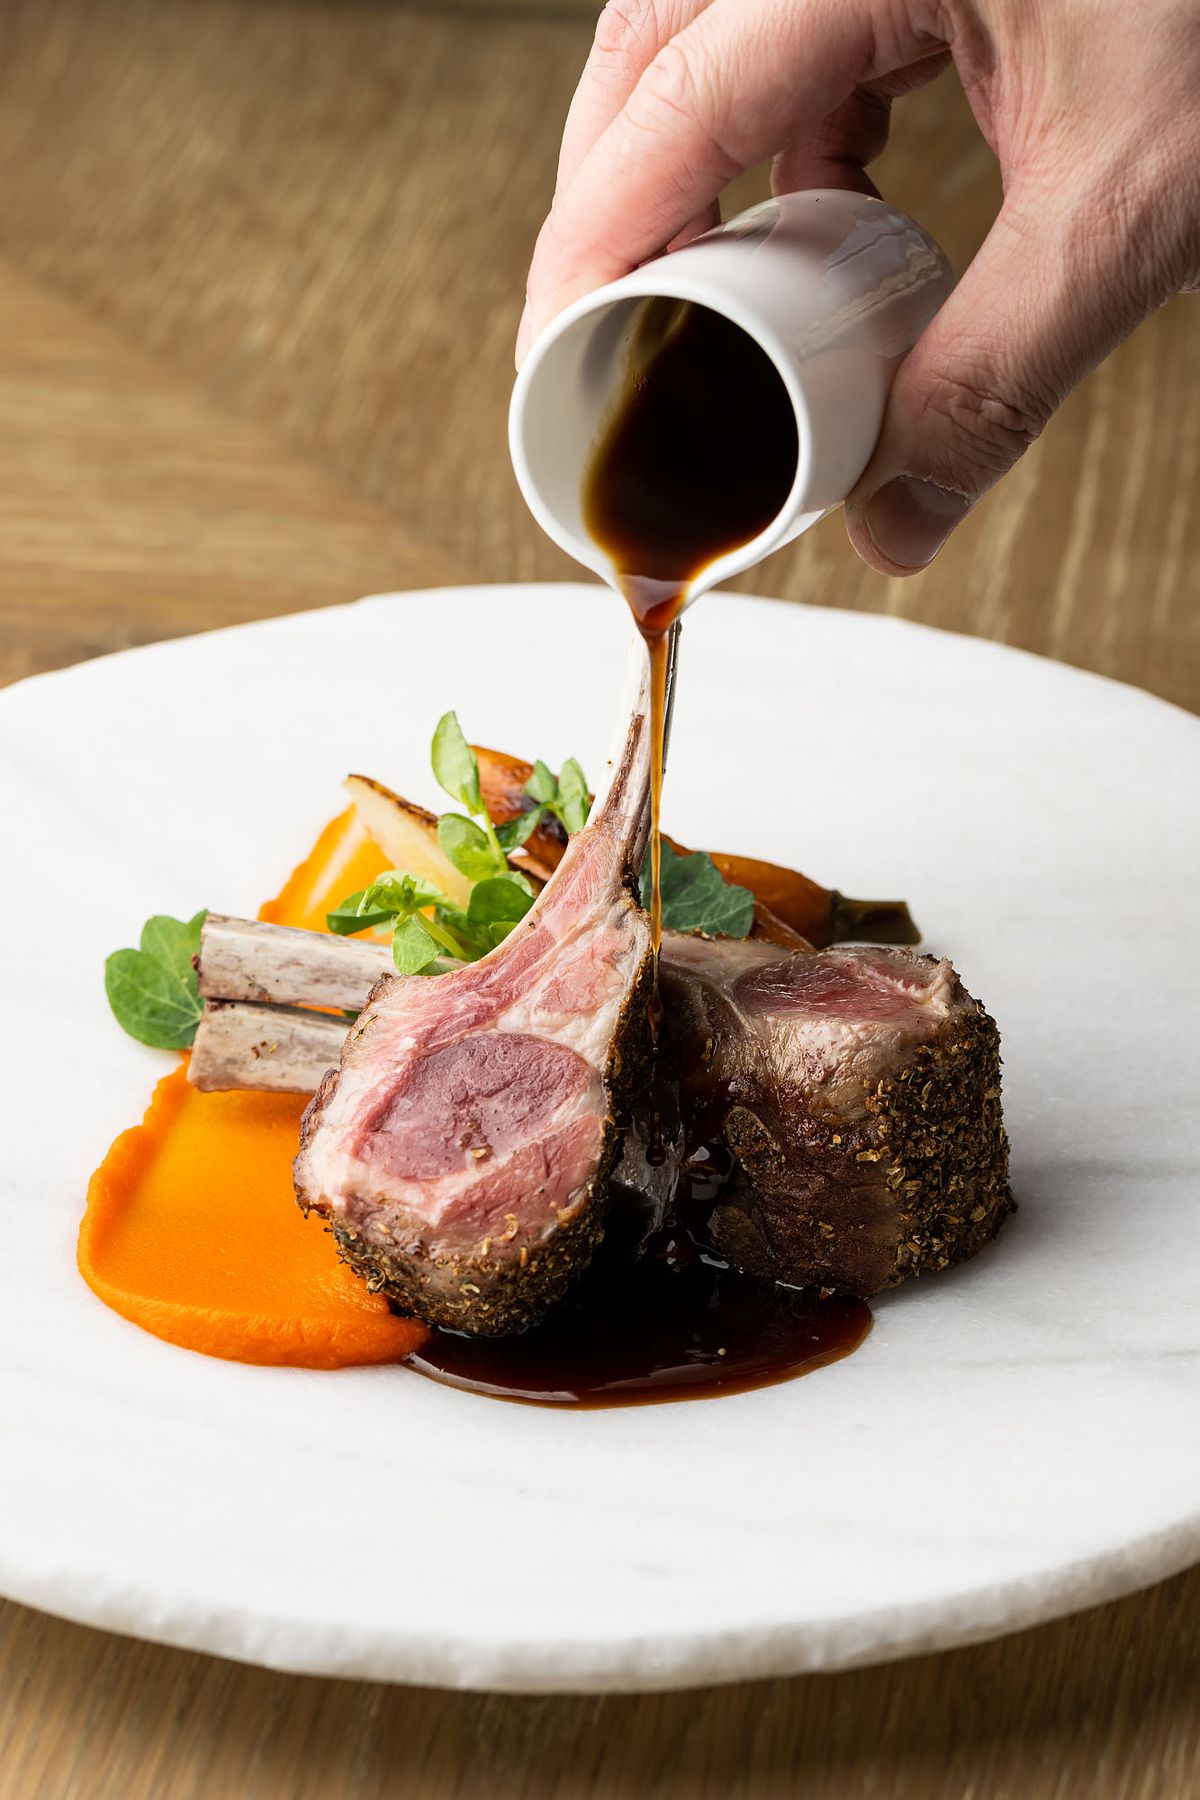 A hand pours a dark brown liquid overtop of rare-cooked lamb chops.